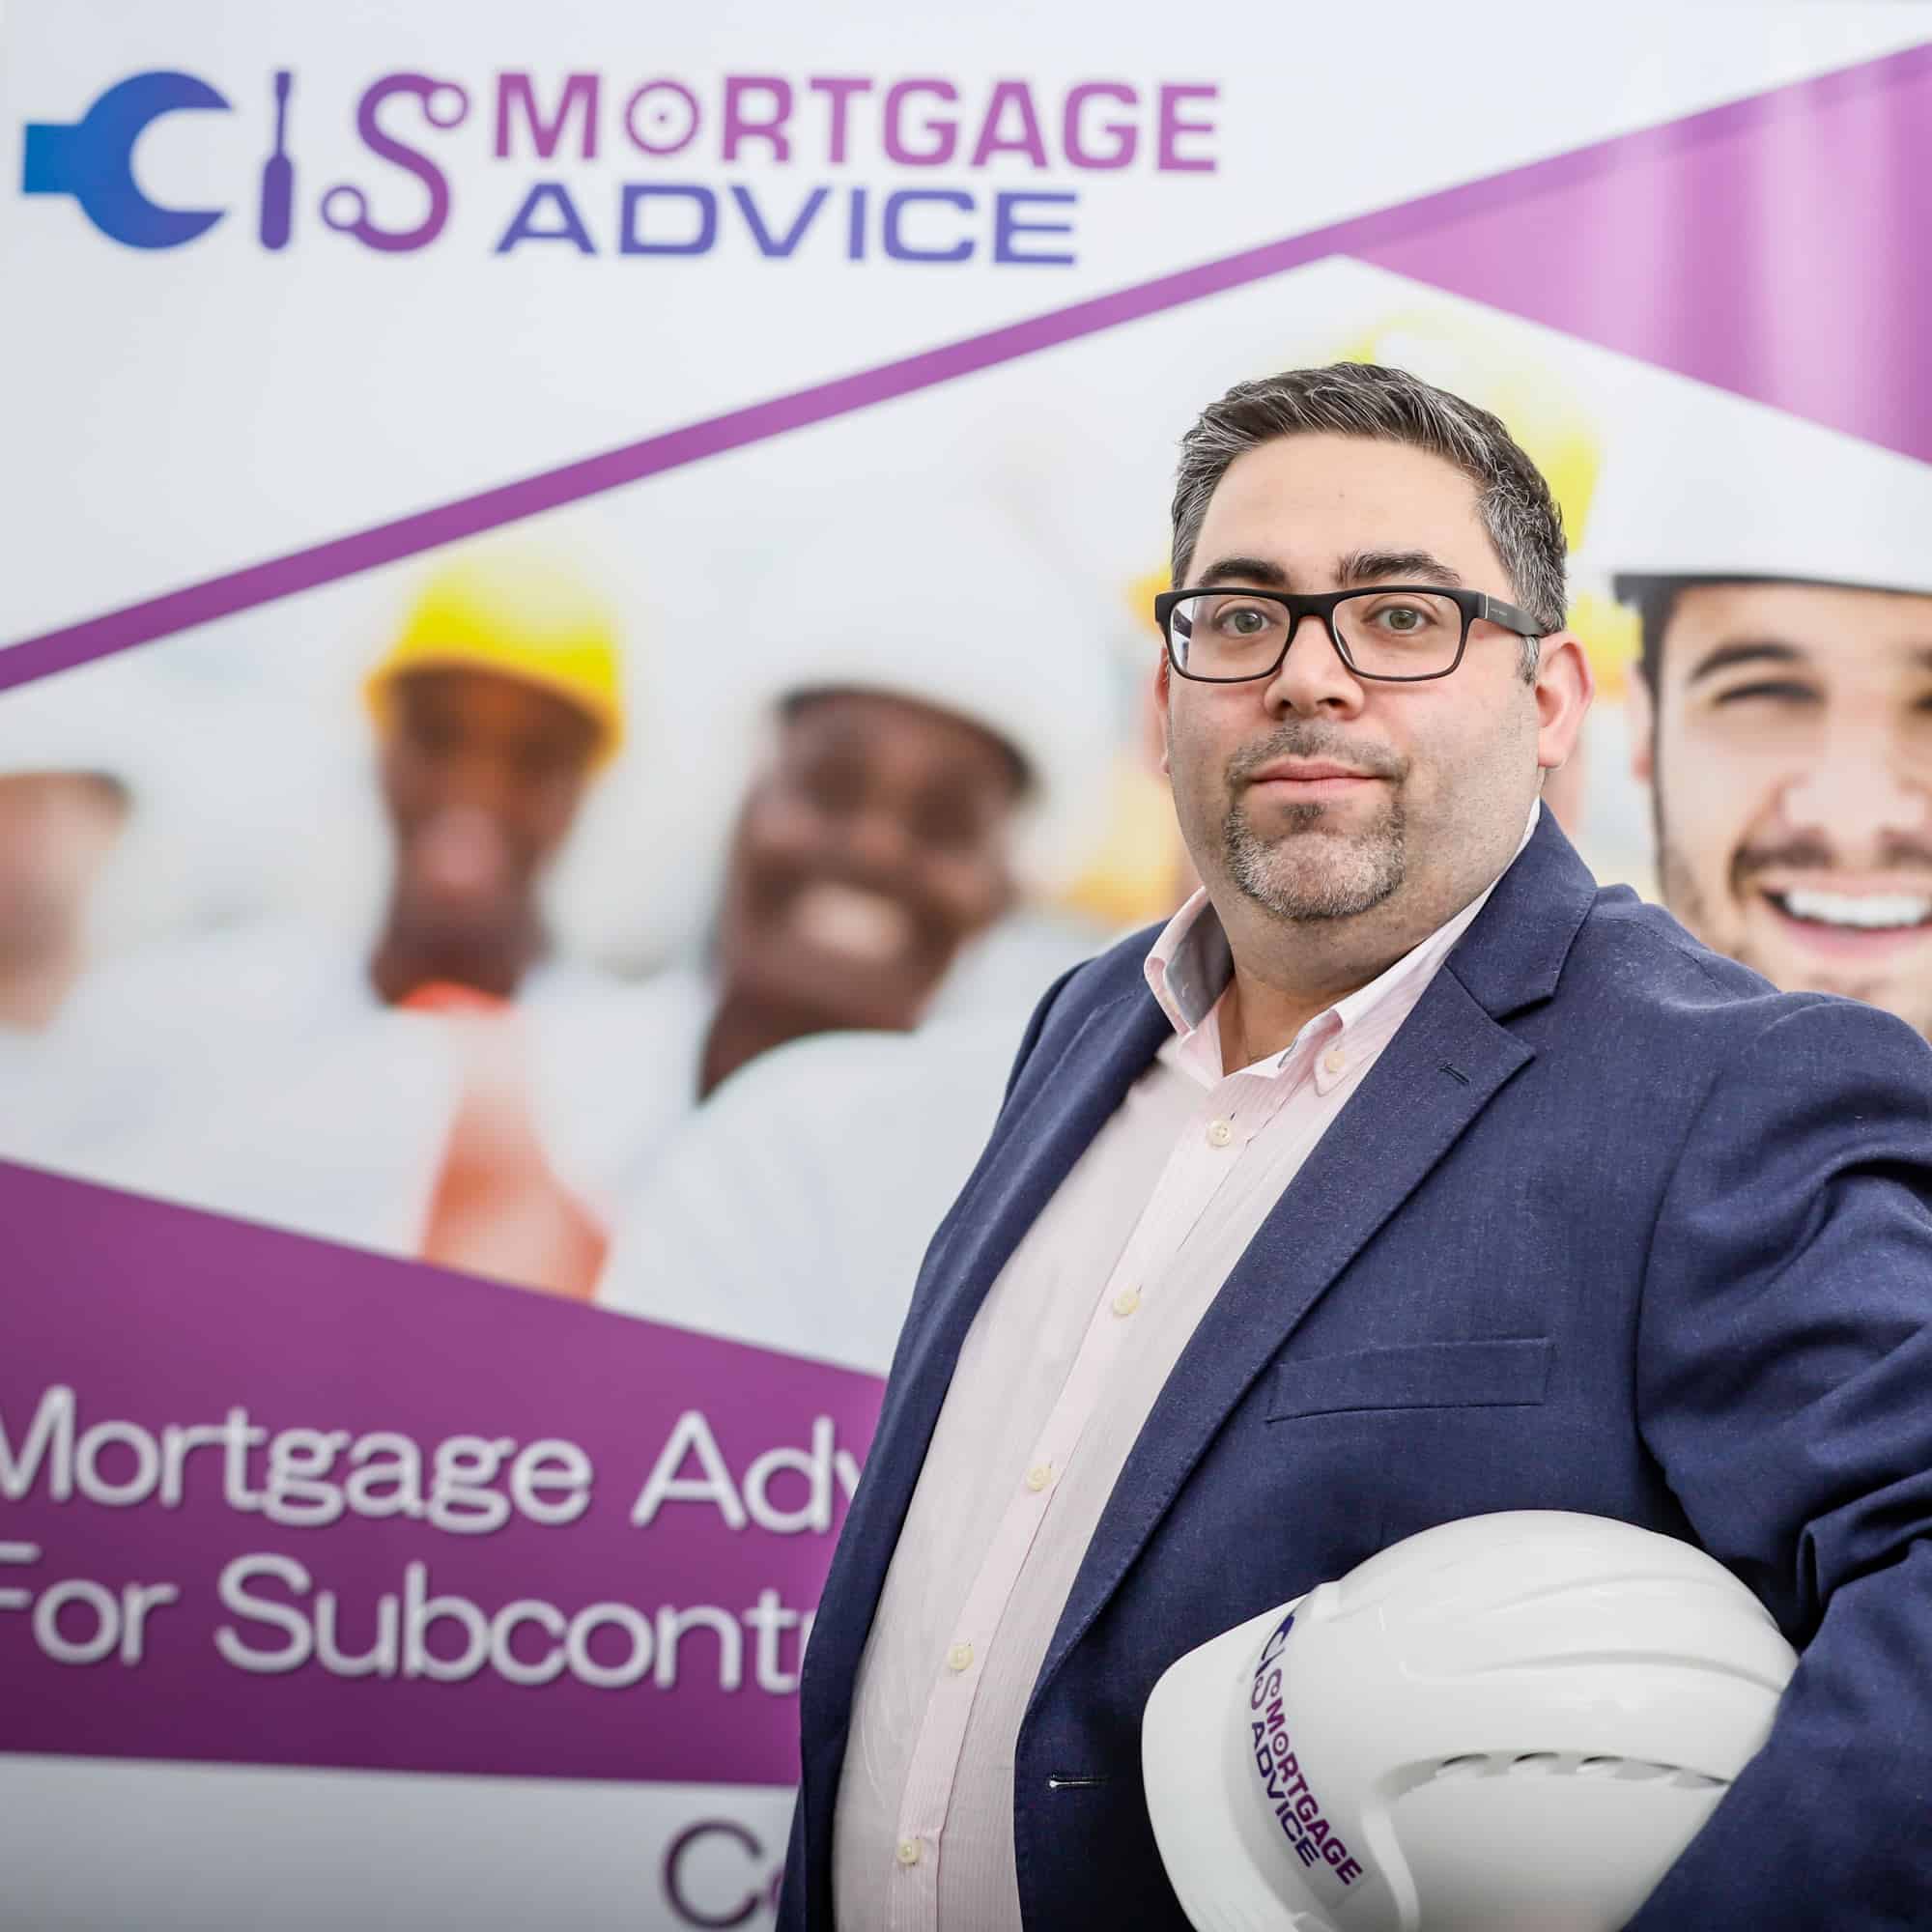 Download Your Free CIS Mortgage Ebook, Expert Mortgage Advice for CIS Subcontractors